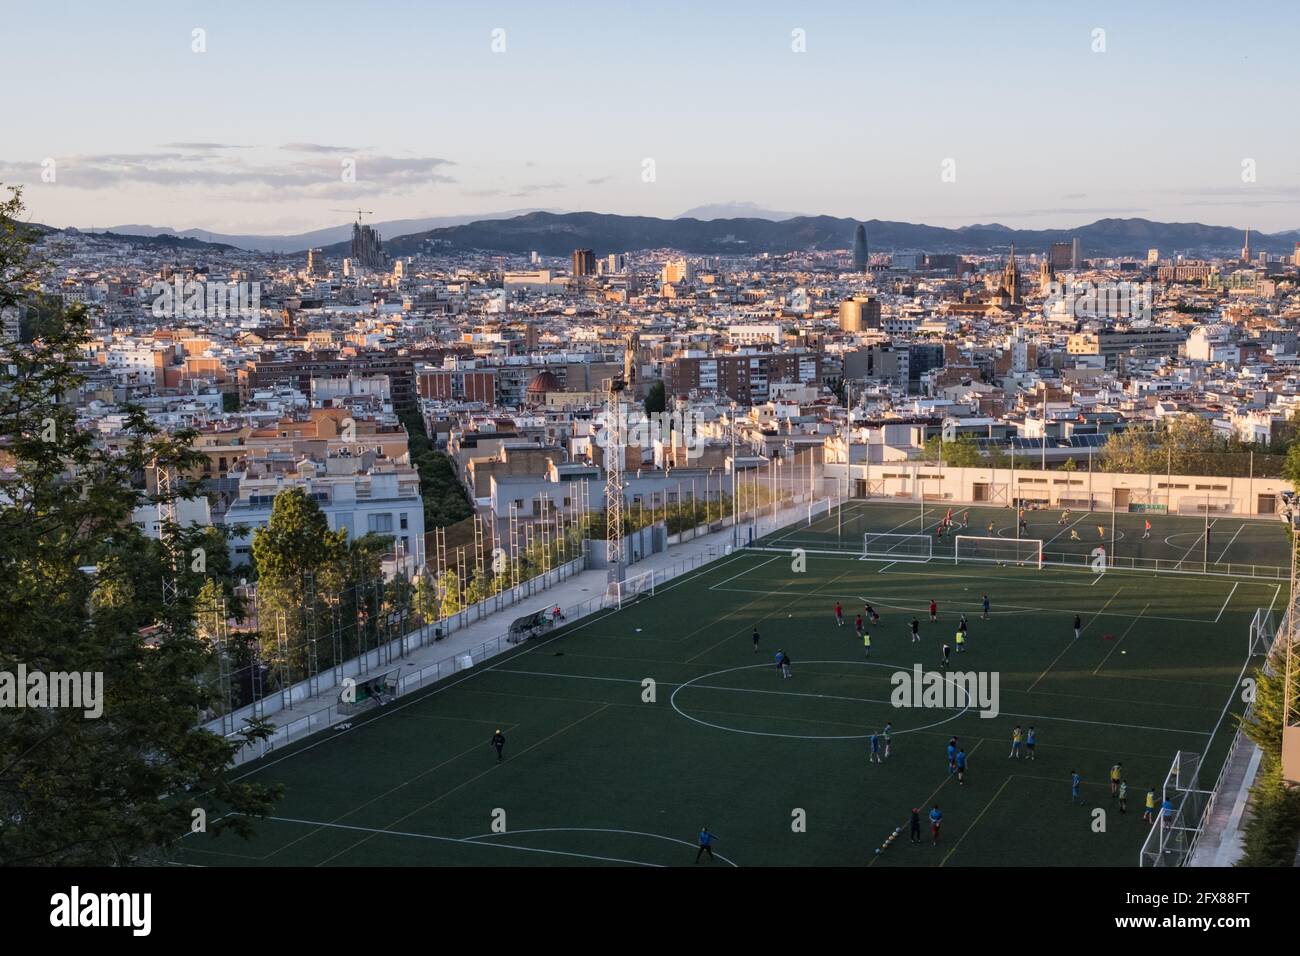 A picture taken on May 11, 2021, from the Montjuïc hill in Barcelona (Spain), shows a municipal soccer pitch located in the district of Poble Sec. Stock Photo